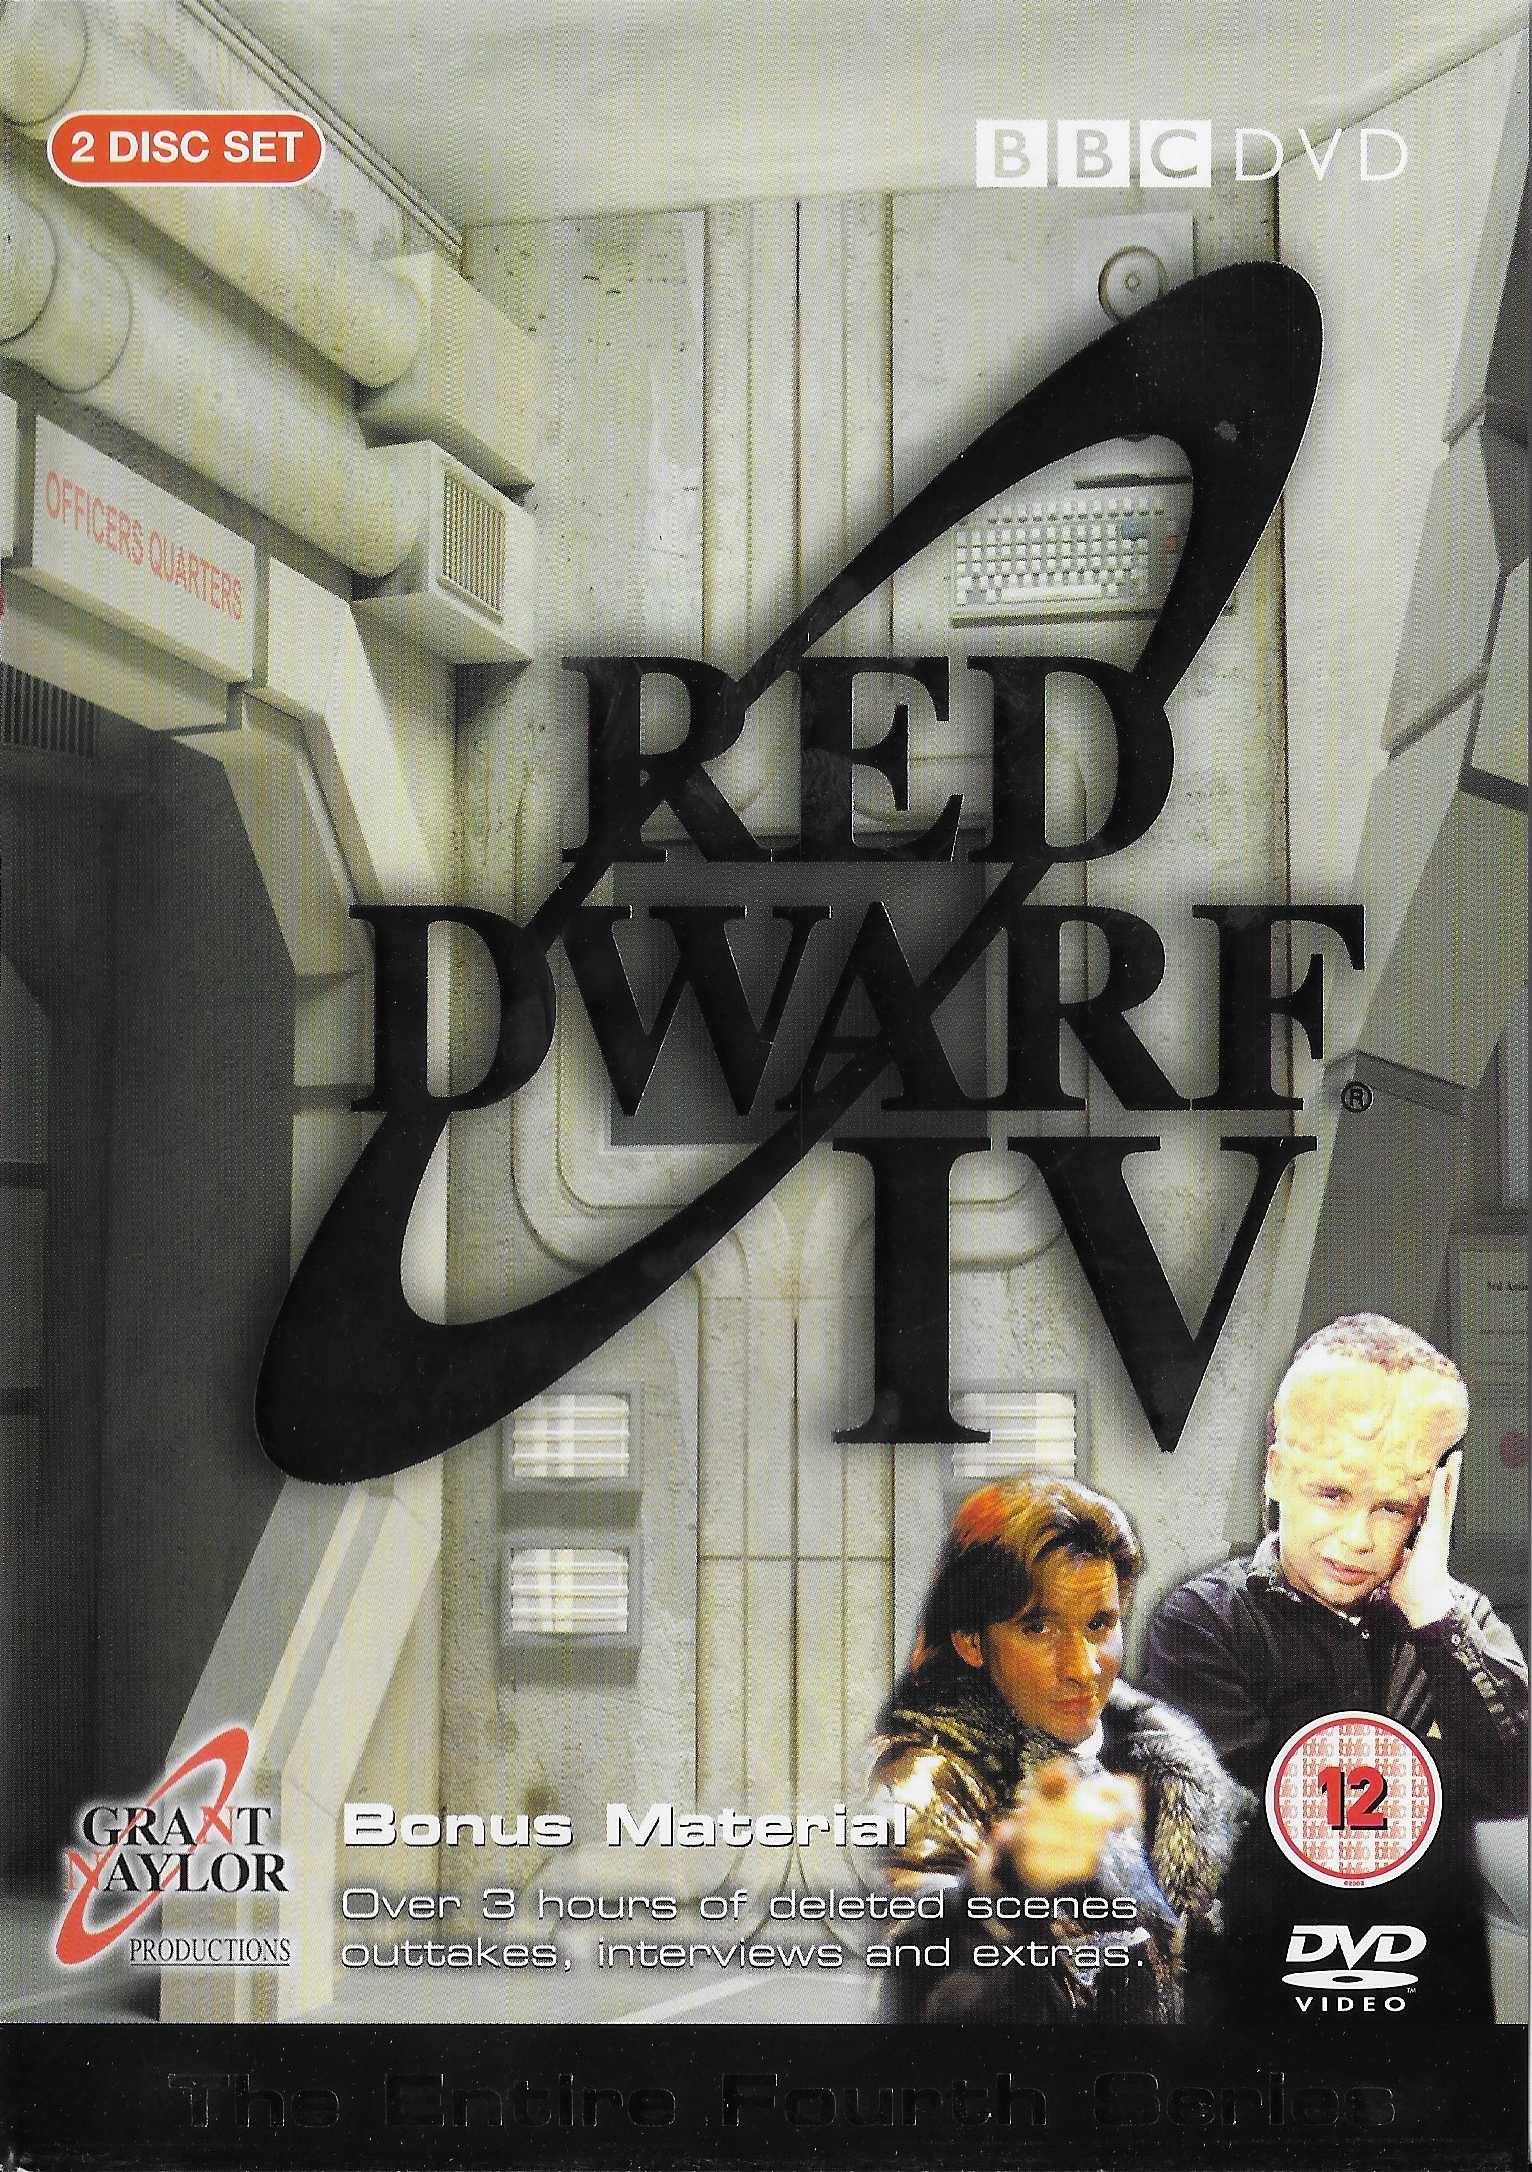 Picture of BBCDVD 1307 Red dwarf - Series IV by artist Rob Grant / Doug Naylor from the BBC records and Tapes library